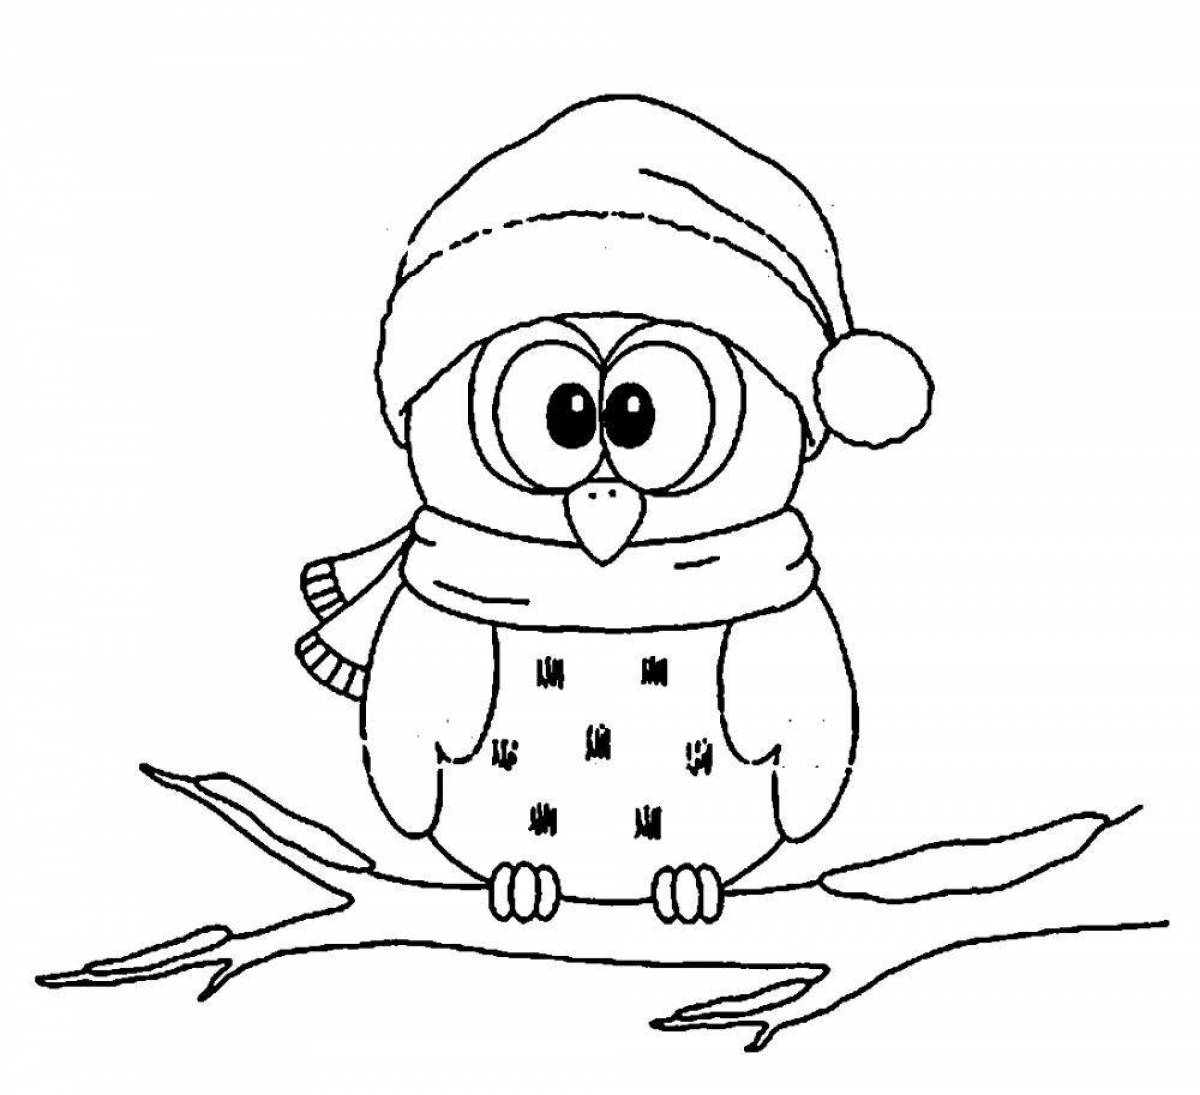 Charming simple winter coloring book